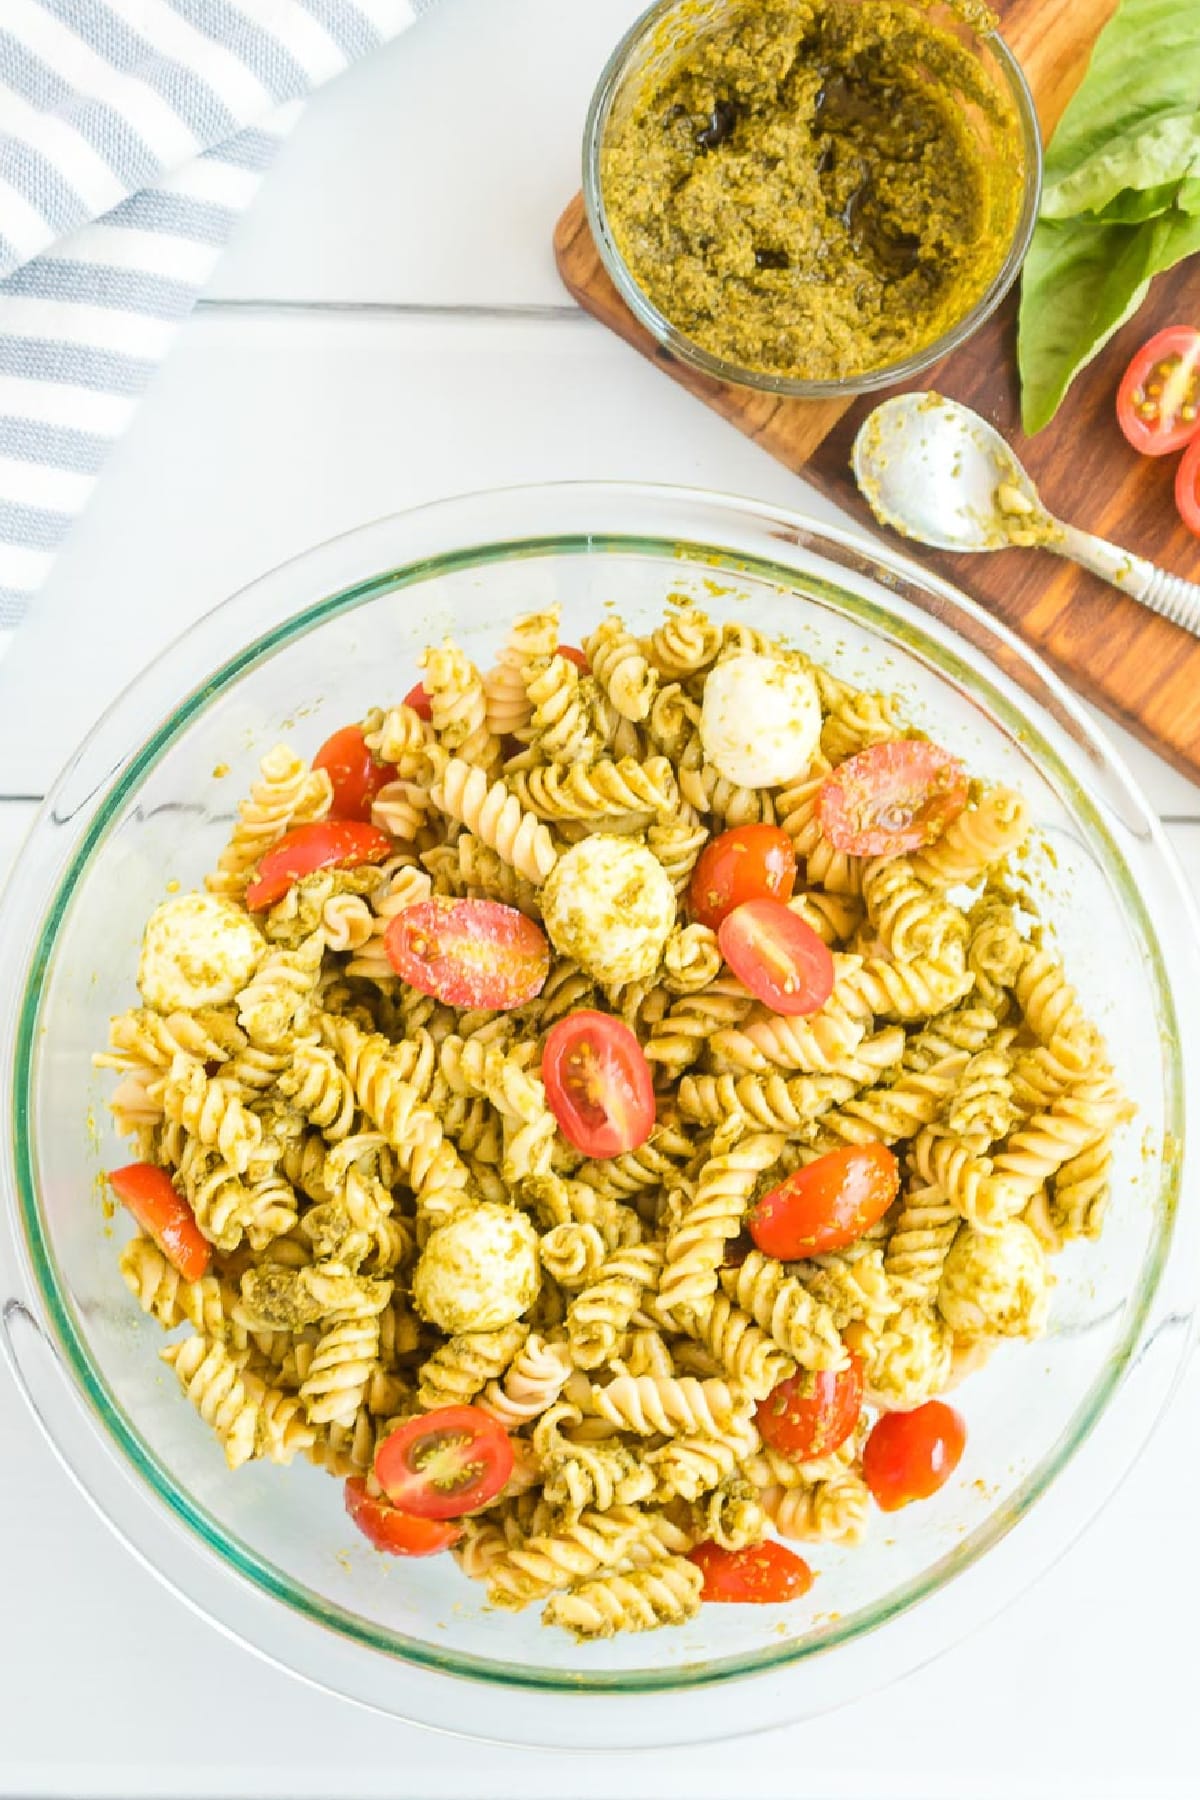 A bowl of pesto pasta salad with fusilli, cherry tomatoes, mozzarella balls, and pesto sauce. A spoon and a jar of pesto are on a wooden board nearby.